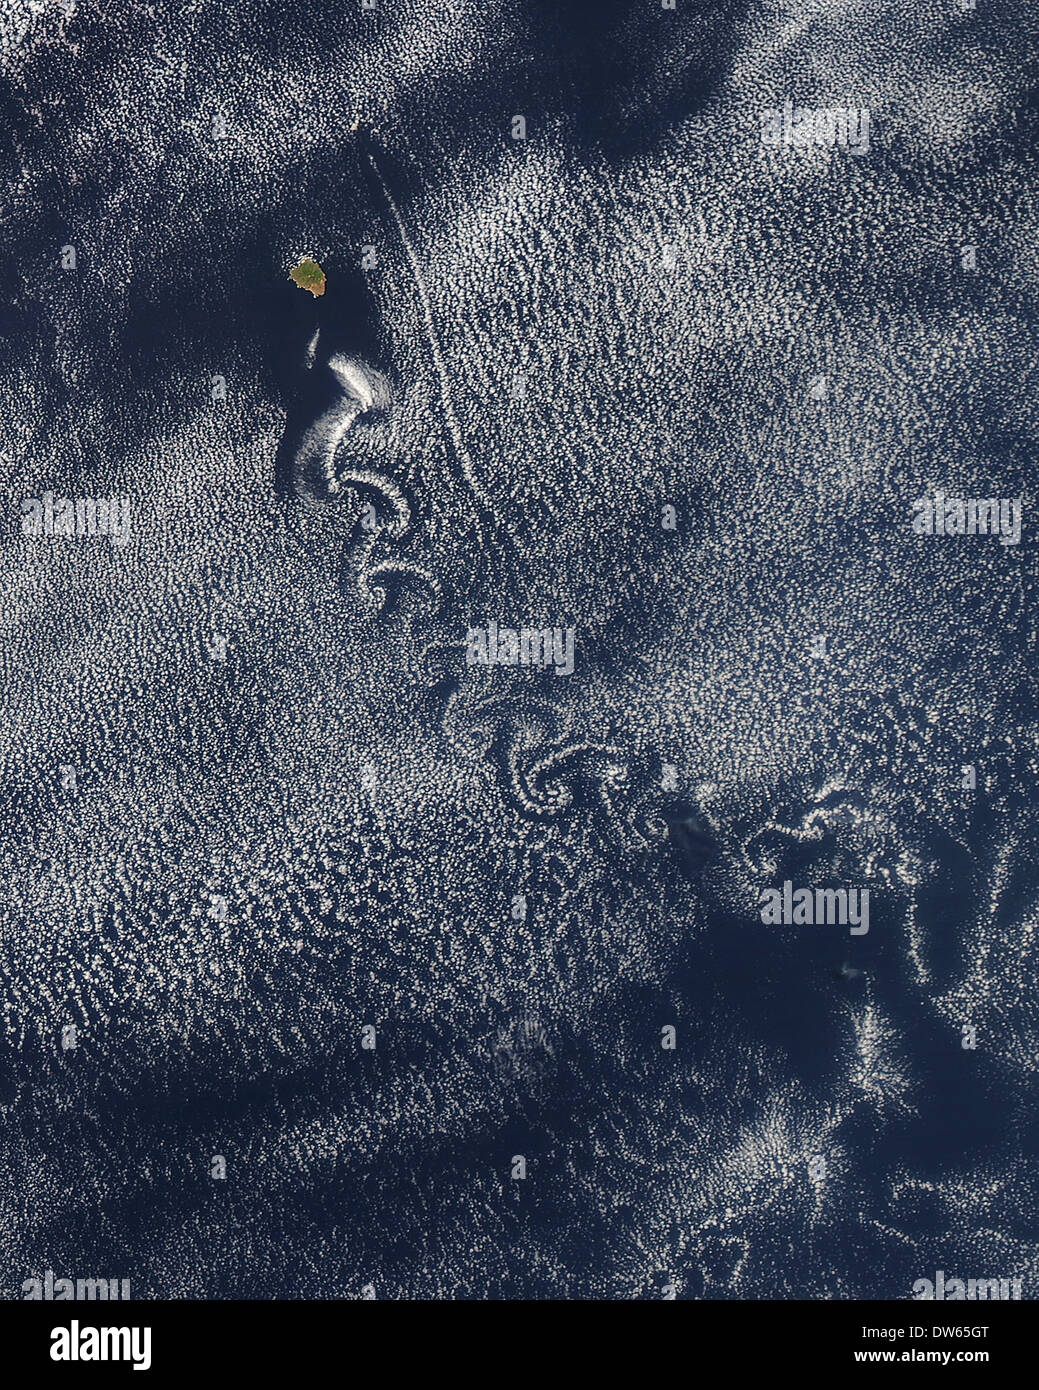 Spiral eddies known as von Kármán vortices, form in clouds downwind of Isla Socorro, a volcanic island in the Pacific Ocean. Stock Photo